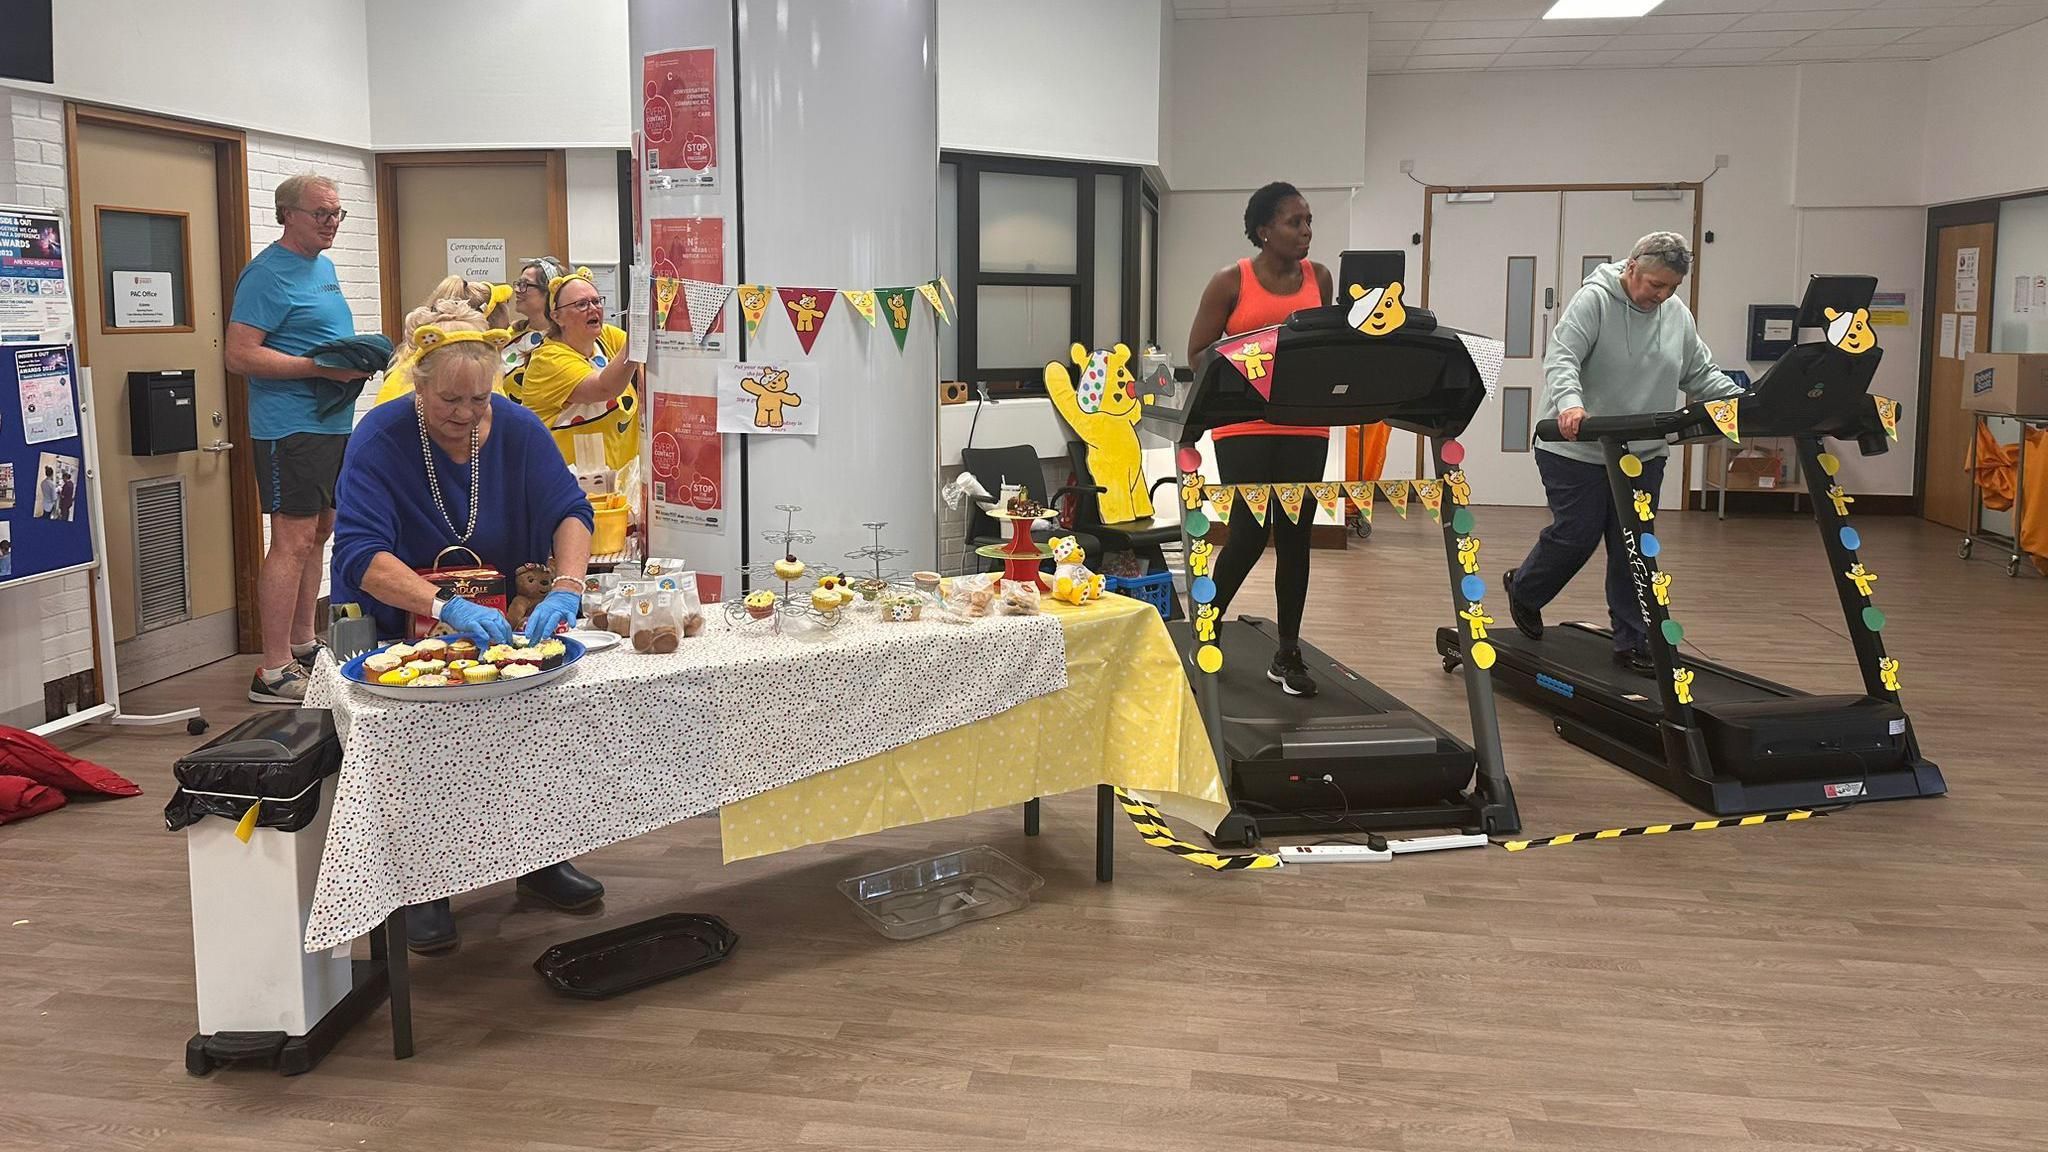 Children in Need fundraising at the General Hospital in Jersey